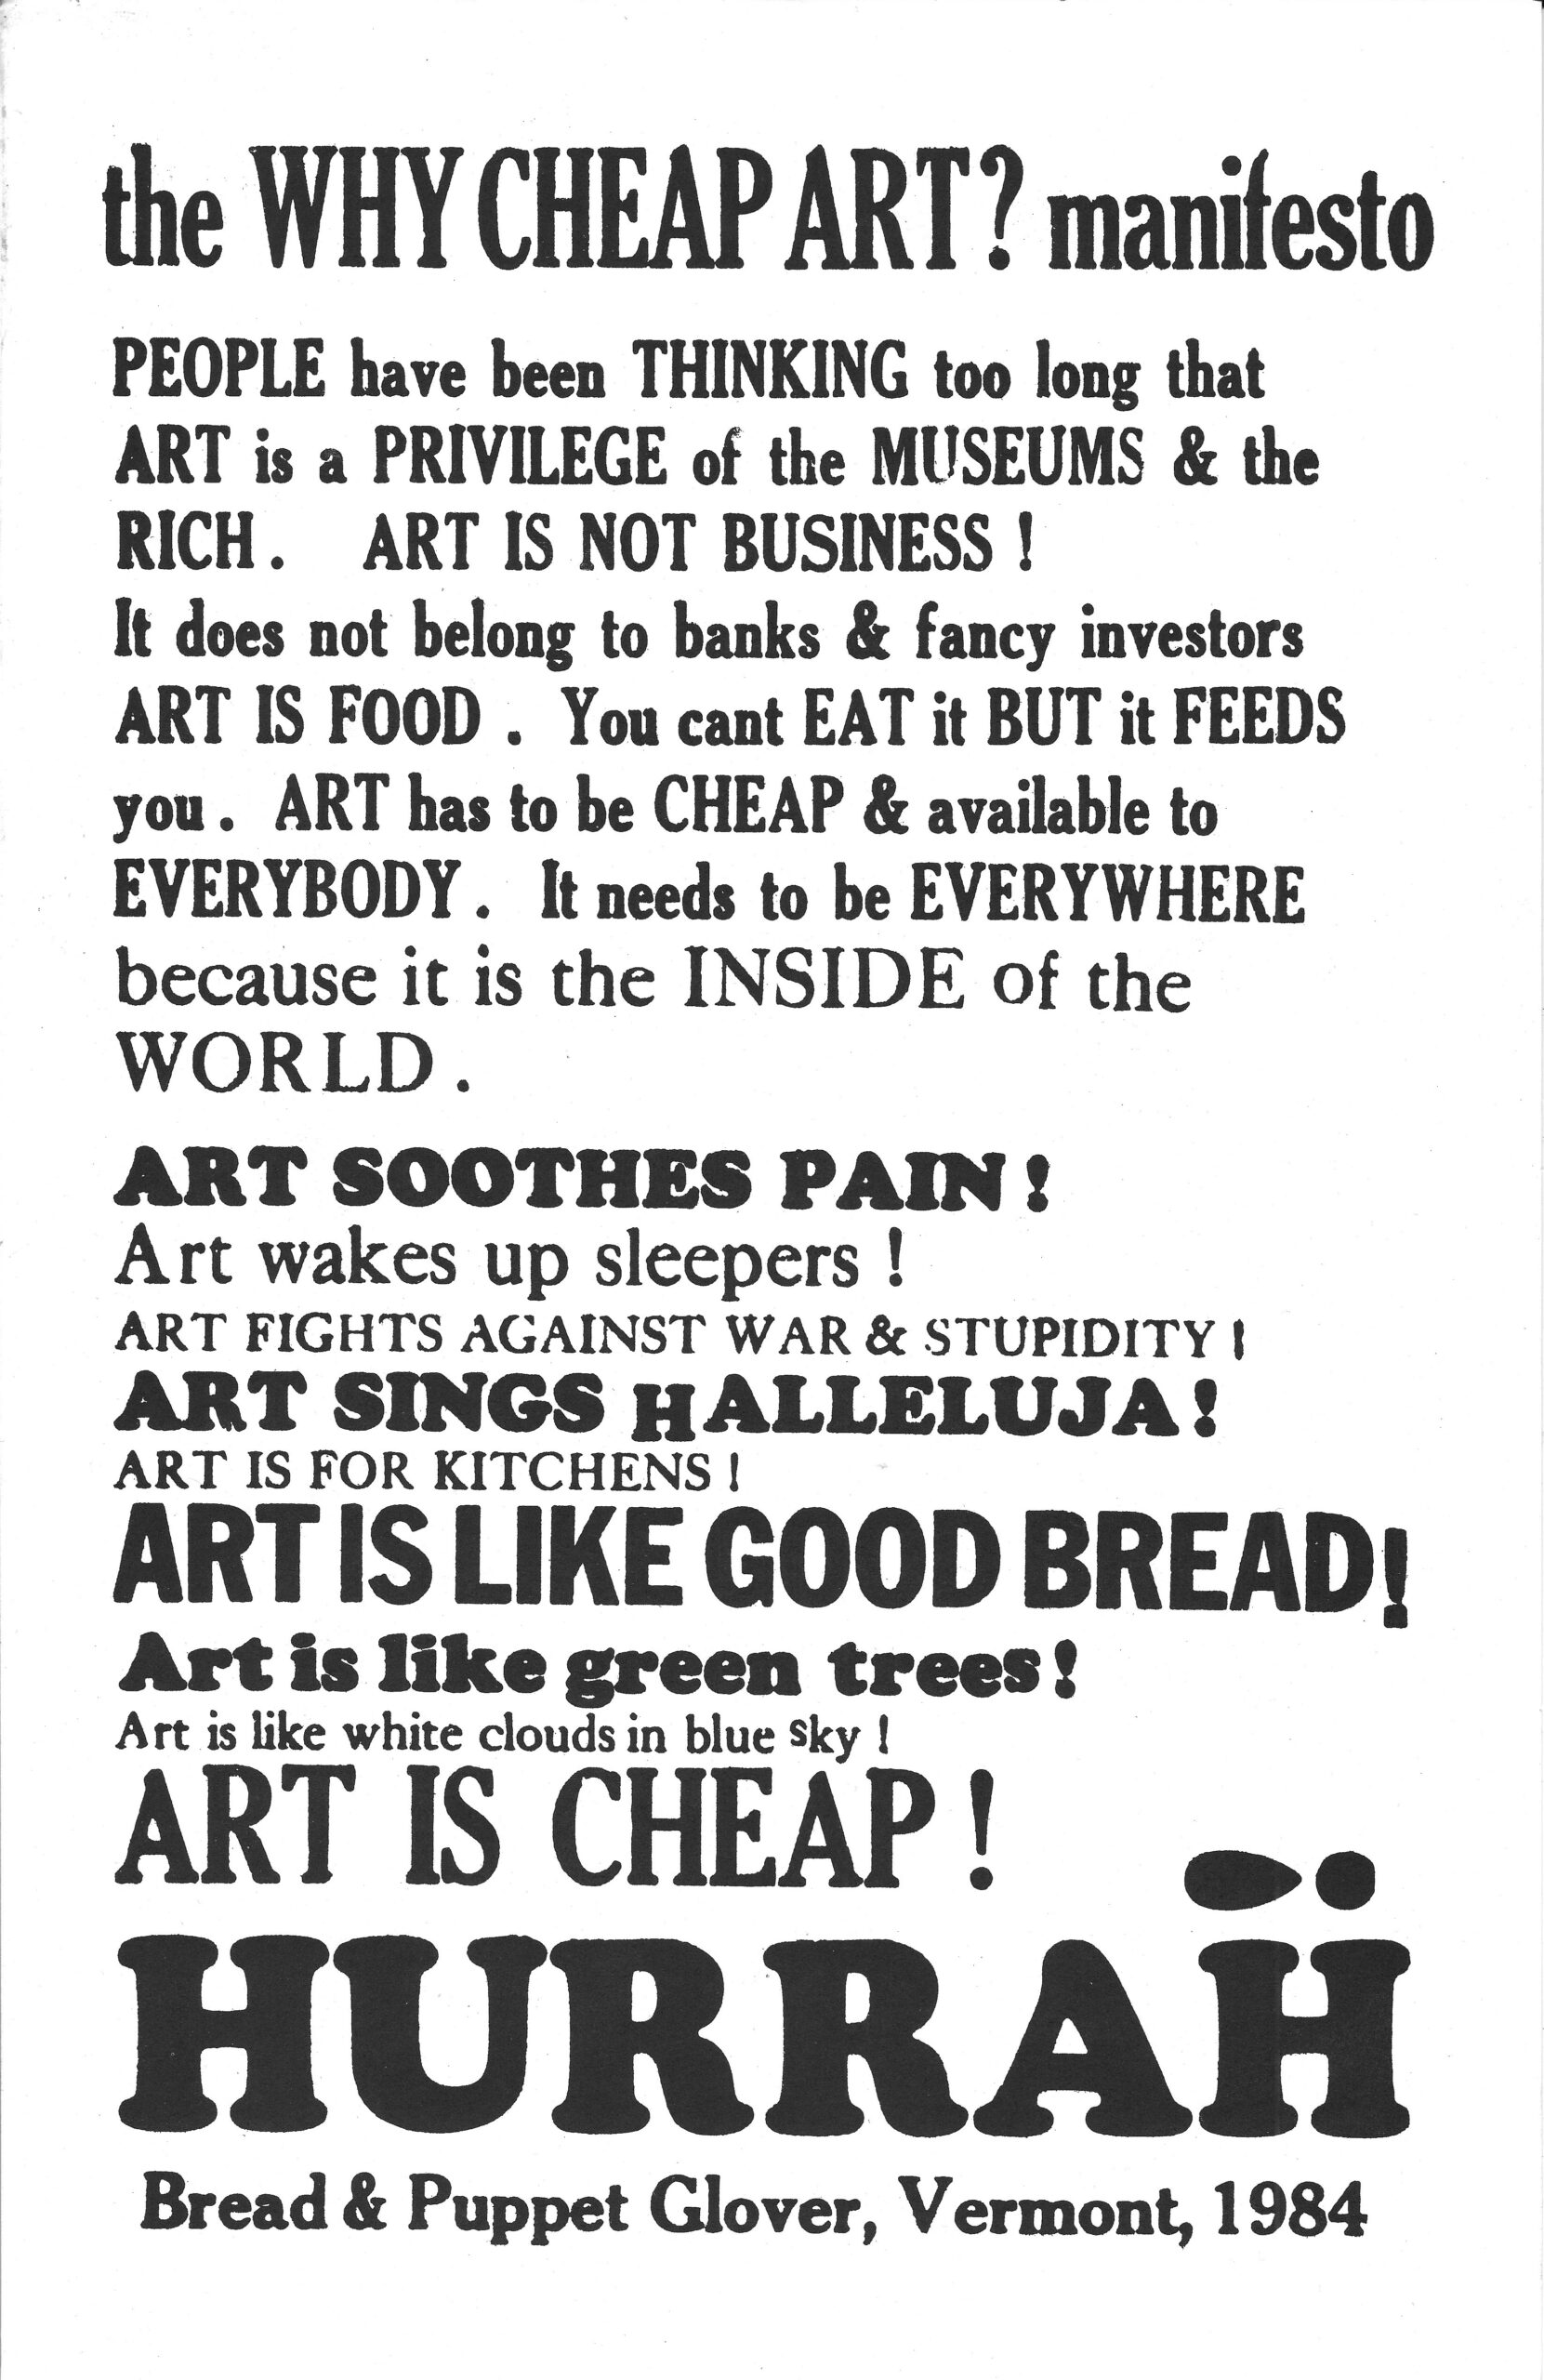 Why Cheap Art? – Bread and Puppet Theater